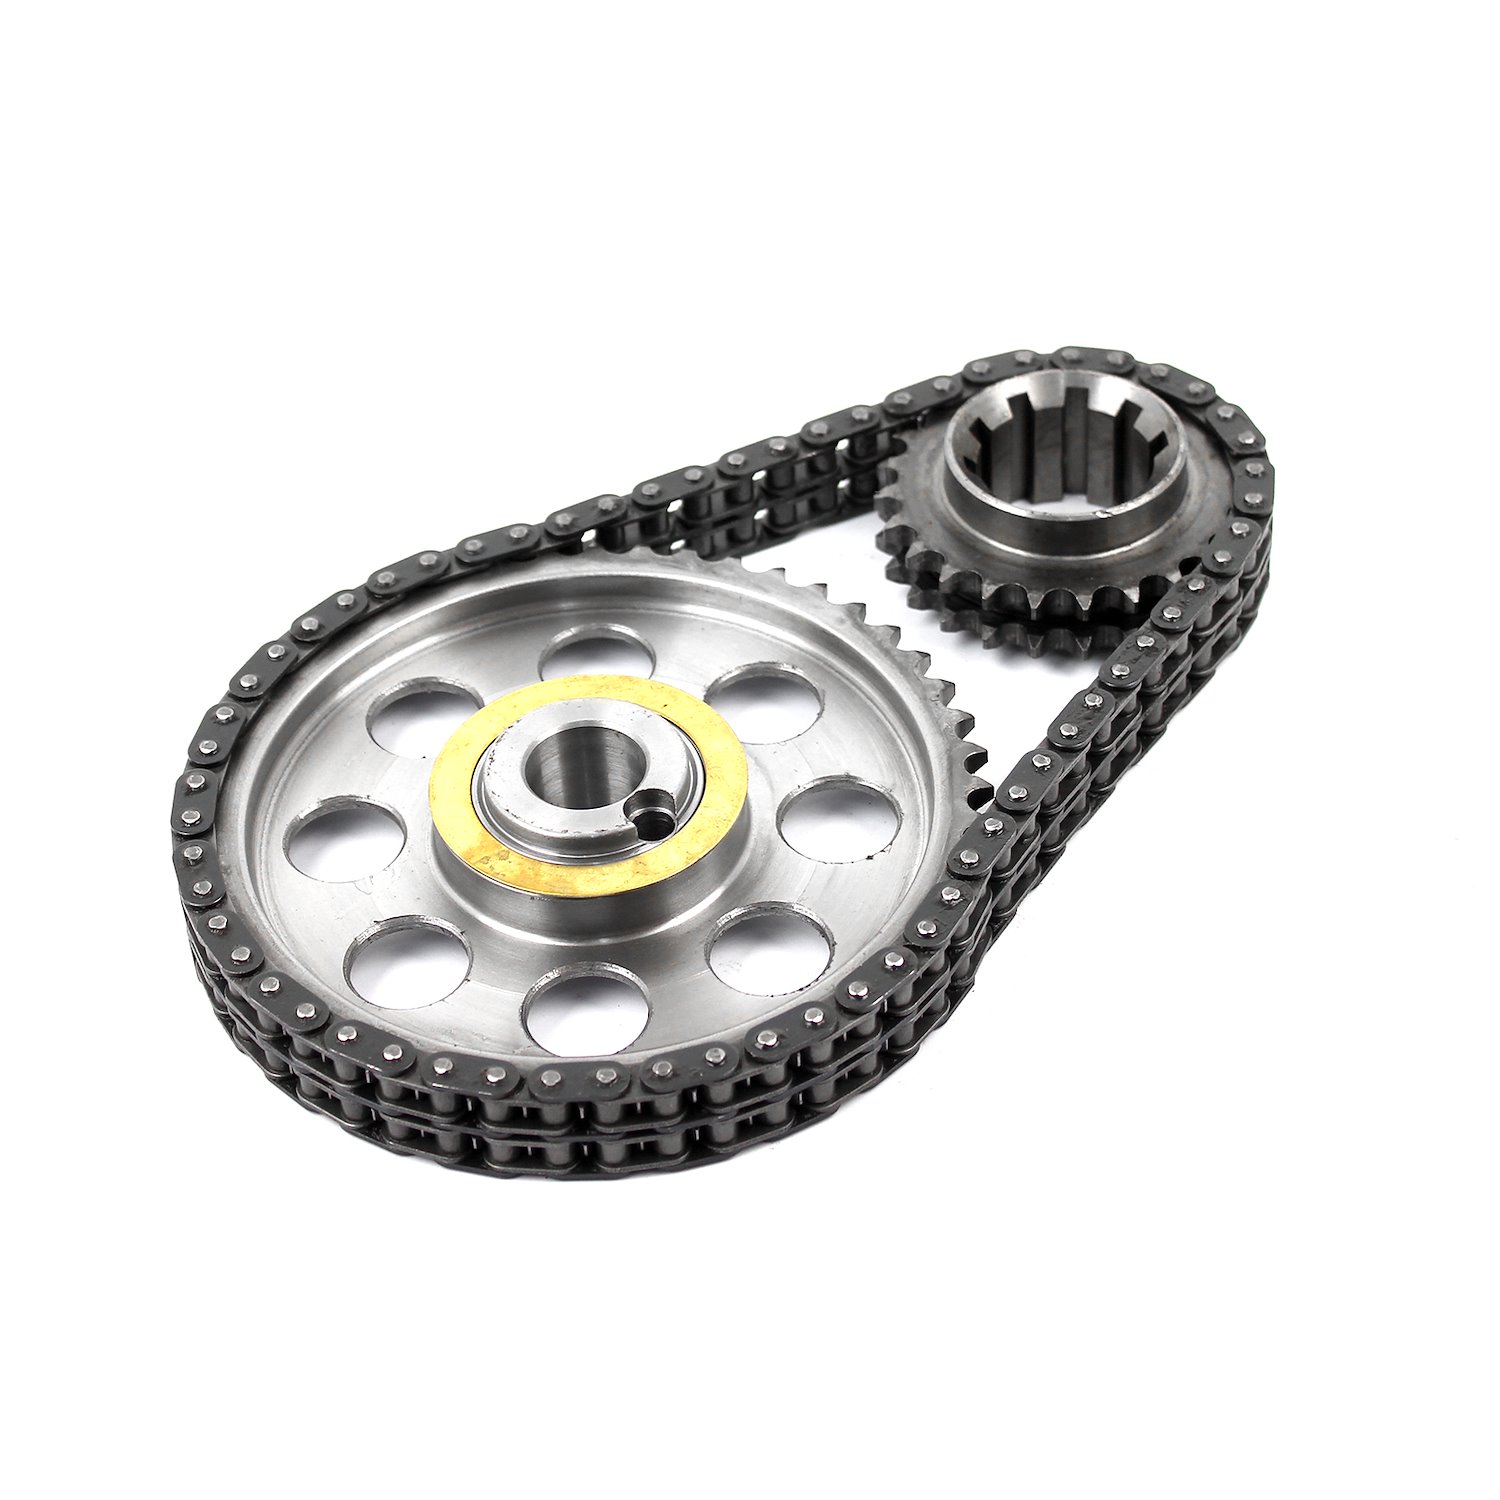 FORD 302 351C CLEVELAND SVO DOUBLE ROLLER 9 KEYWAY BILLET STEEL TIMING CHAIN KIT